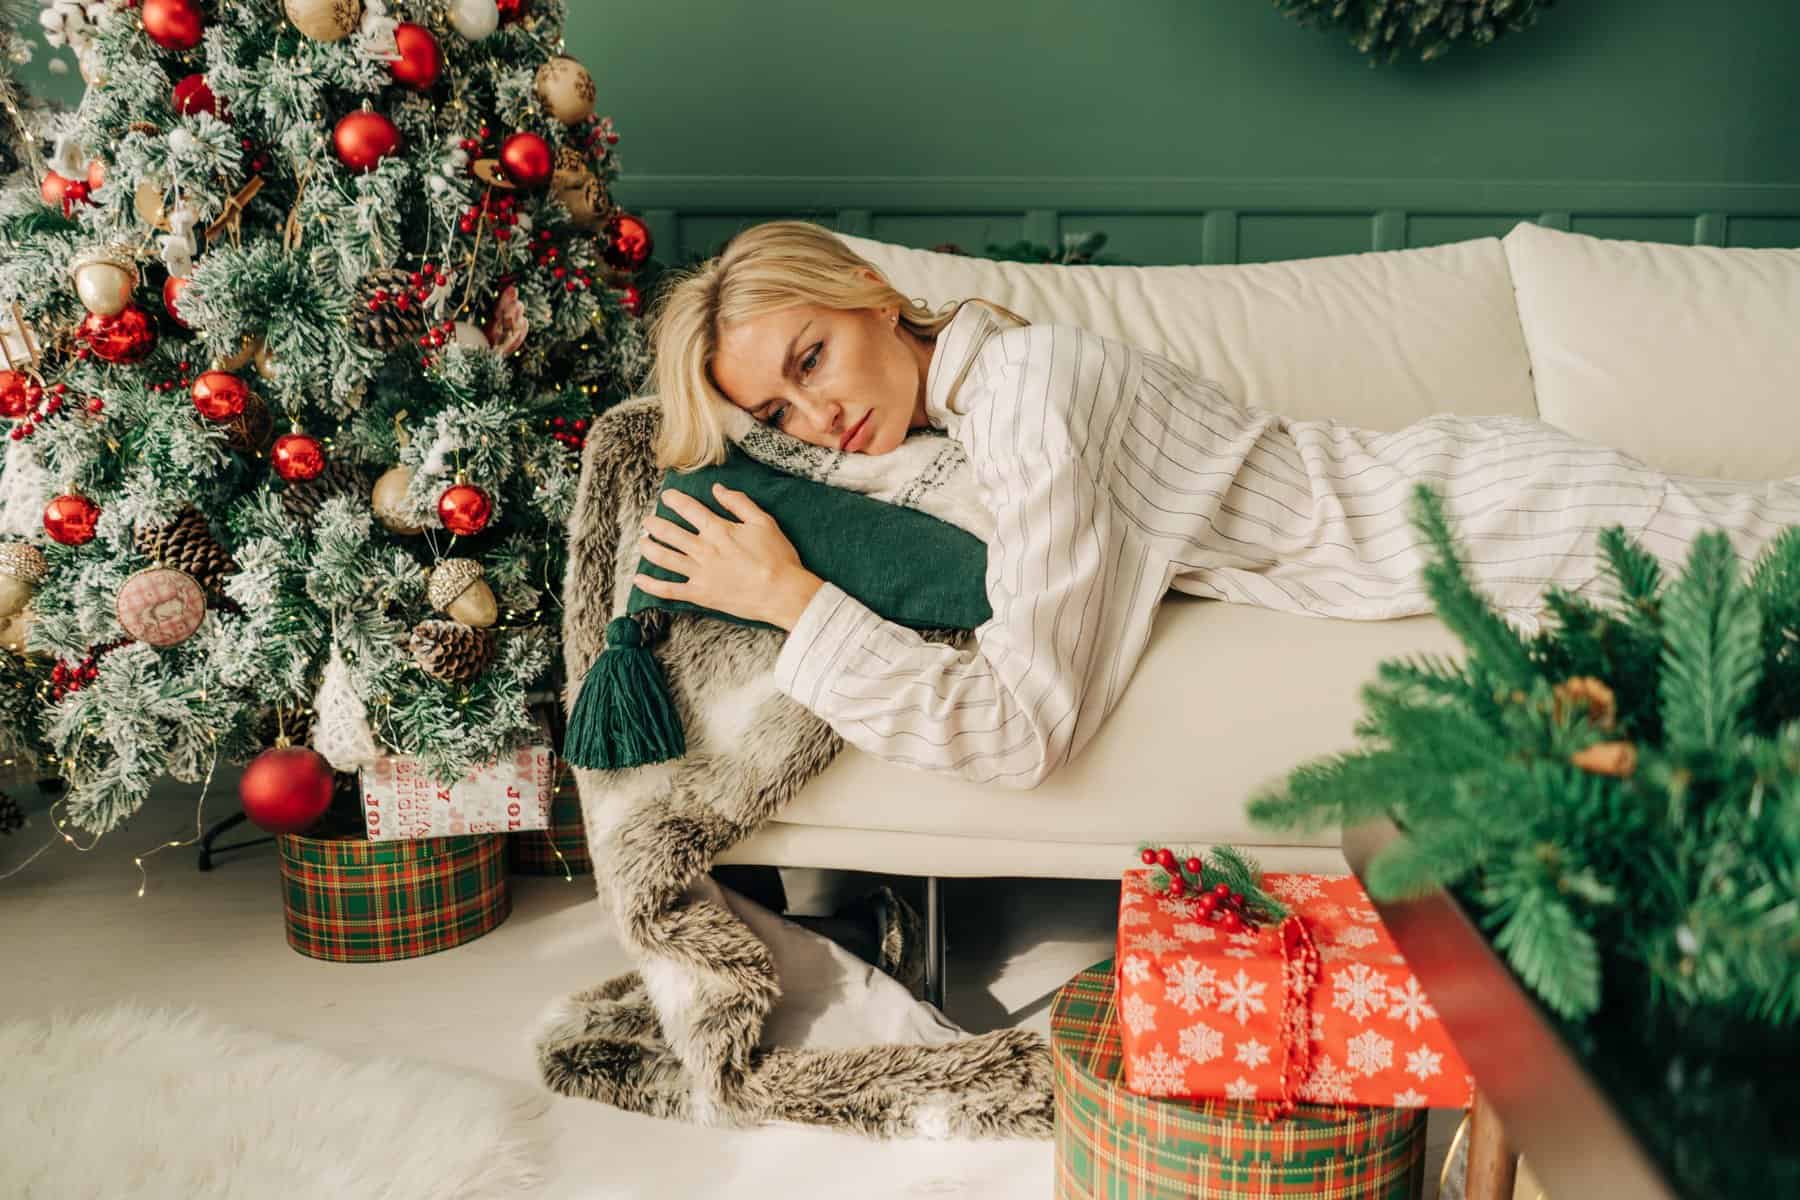 A woman looks serious while laying on couch in front of Christmas tree.